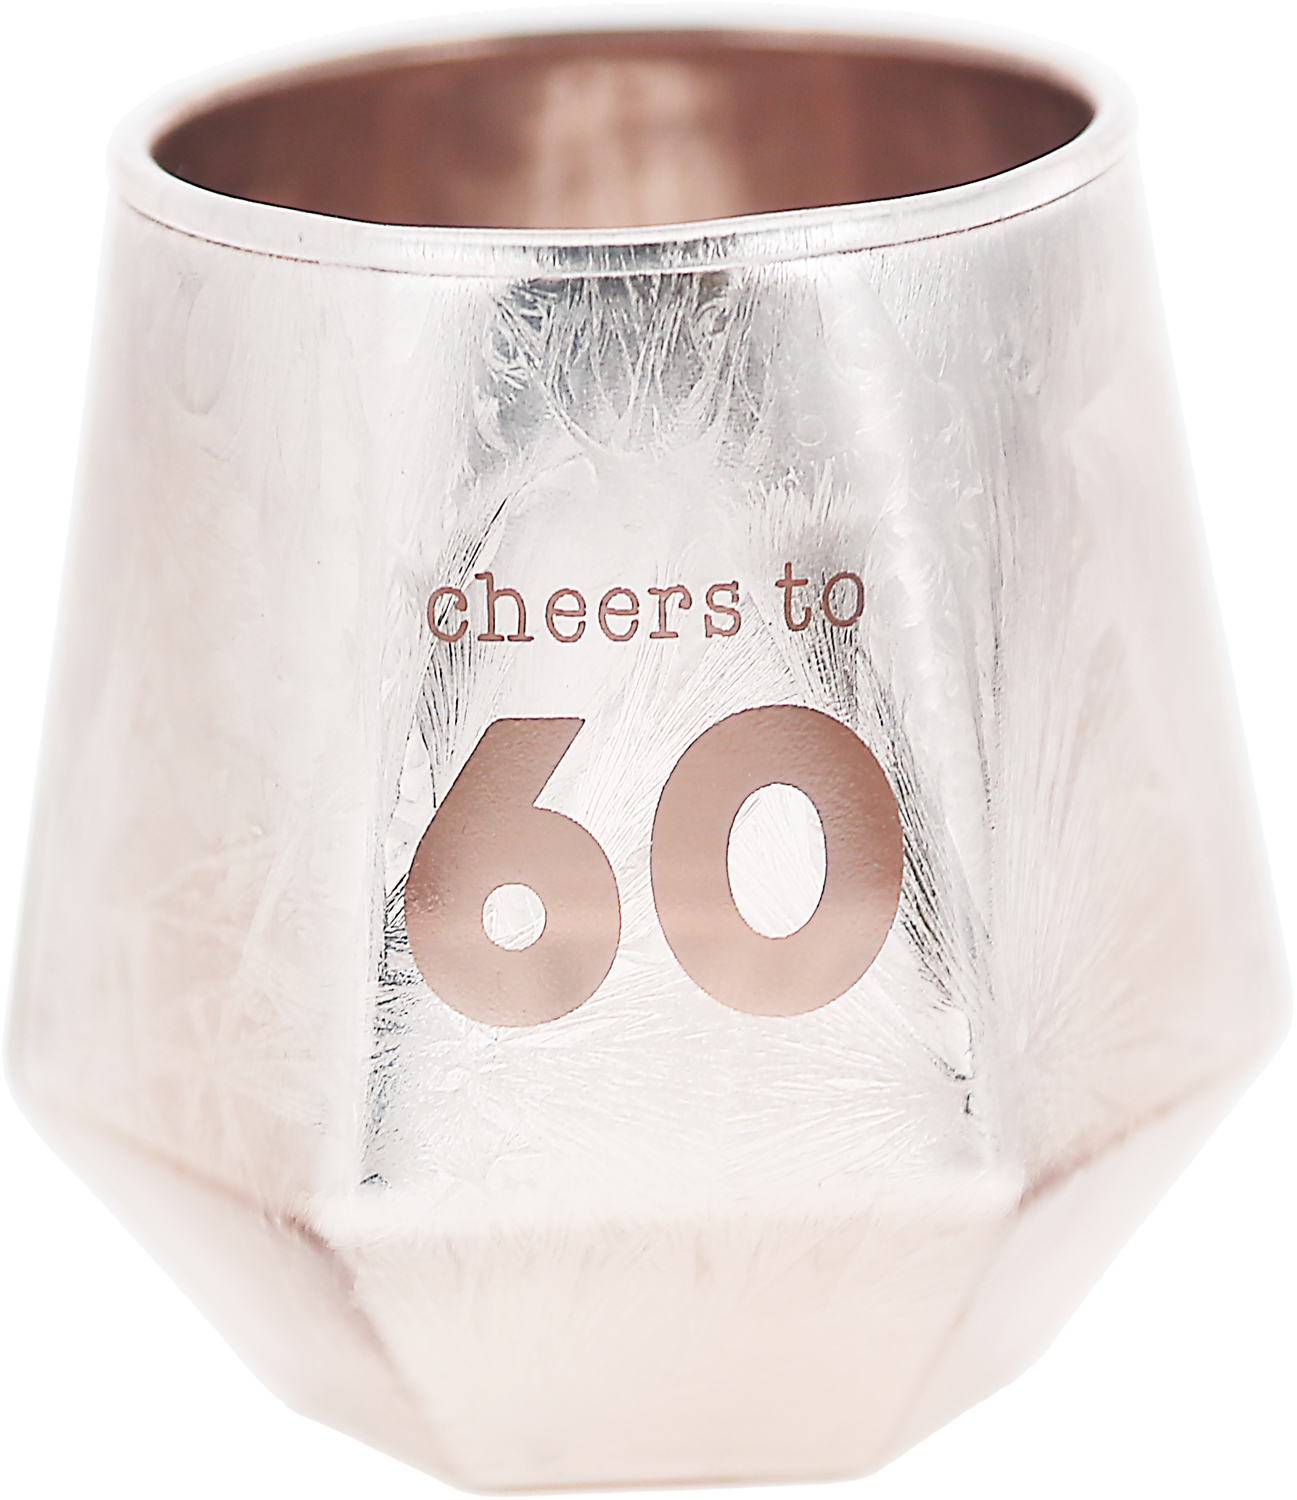 Cheers to 60 by Happy Confetti to You - Cheers to 60 - 3 oz Geometric Shot Glass